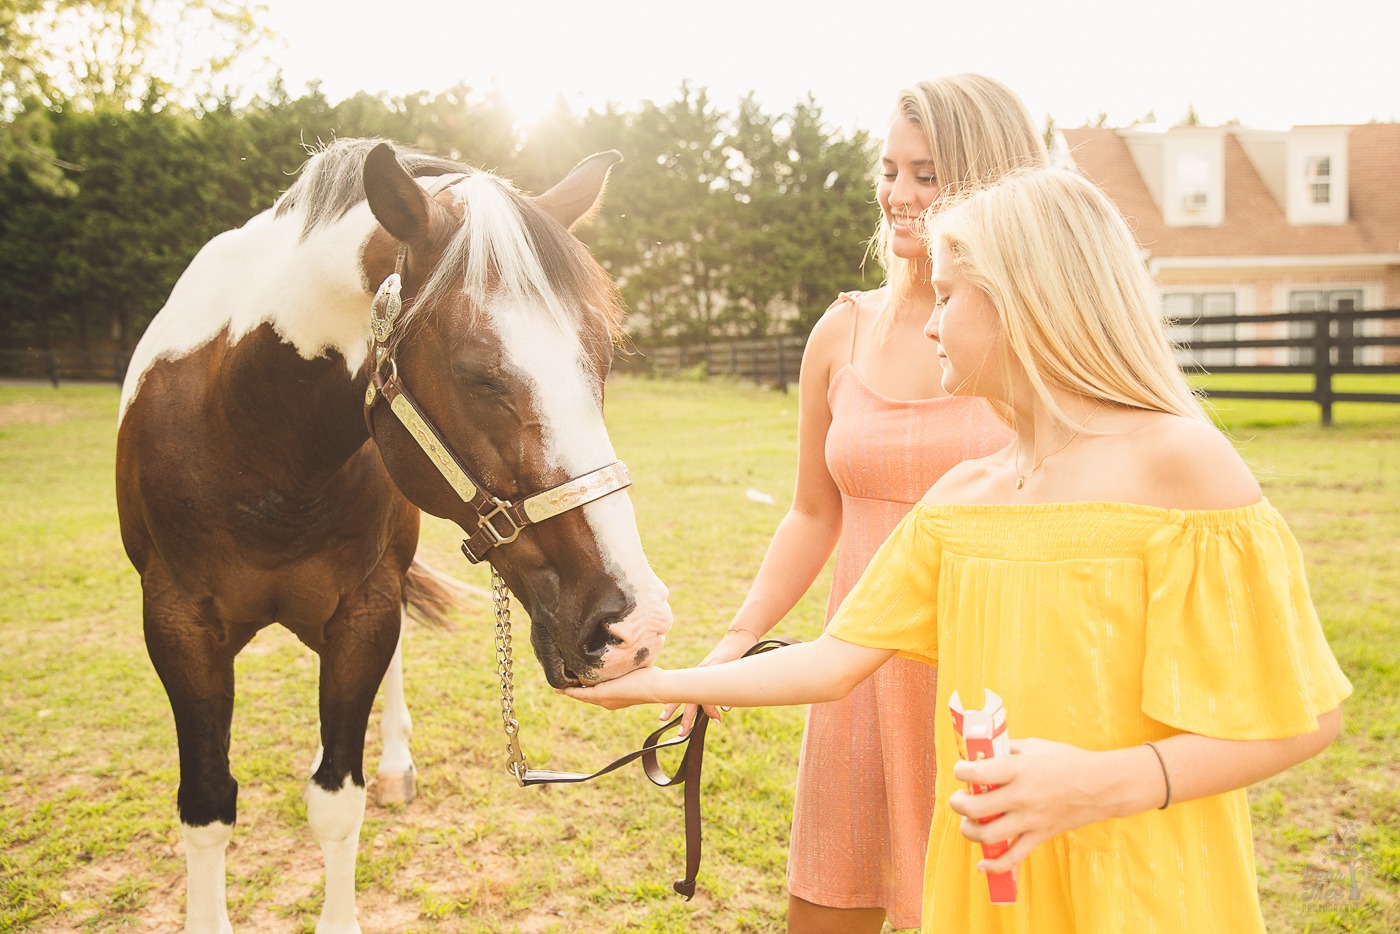 Two sisters feeding their paint horse Red Hots candies as a bribe to behave during their photoshoot